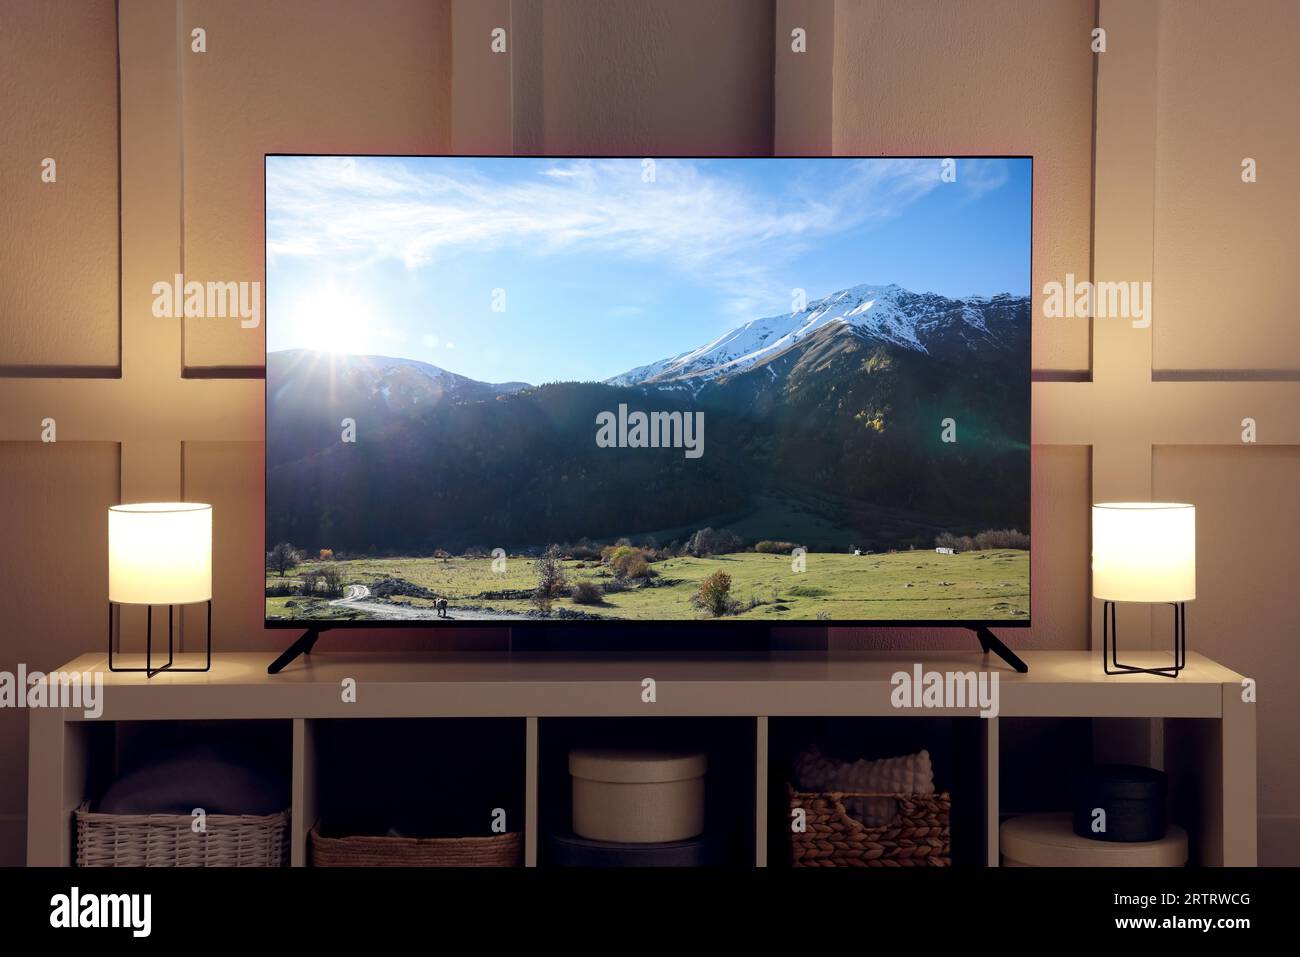 Amazing mountain landscape on TV screen in room Stock Photo